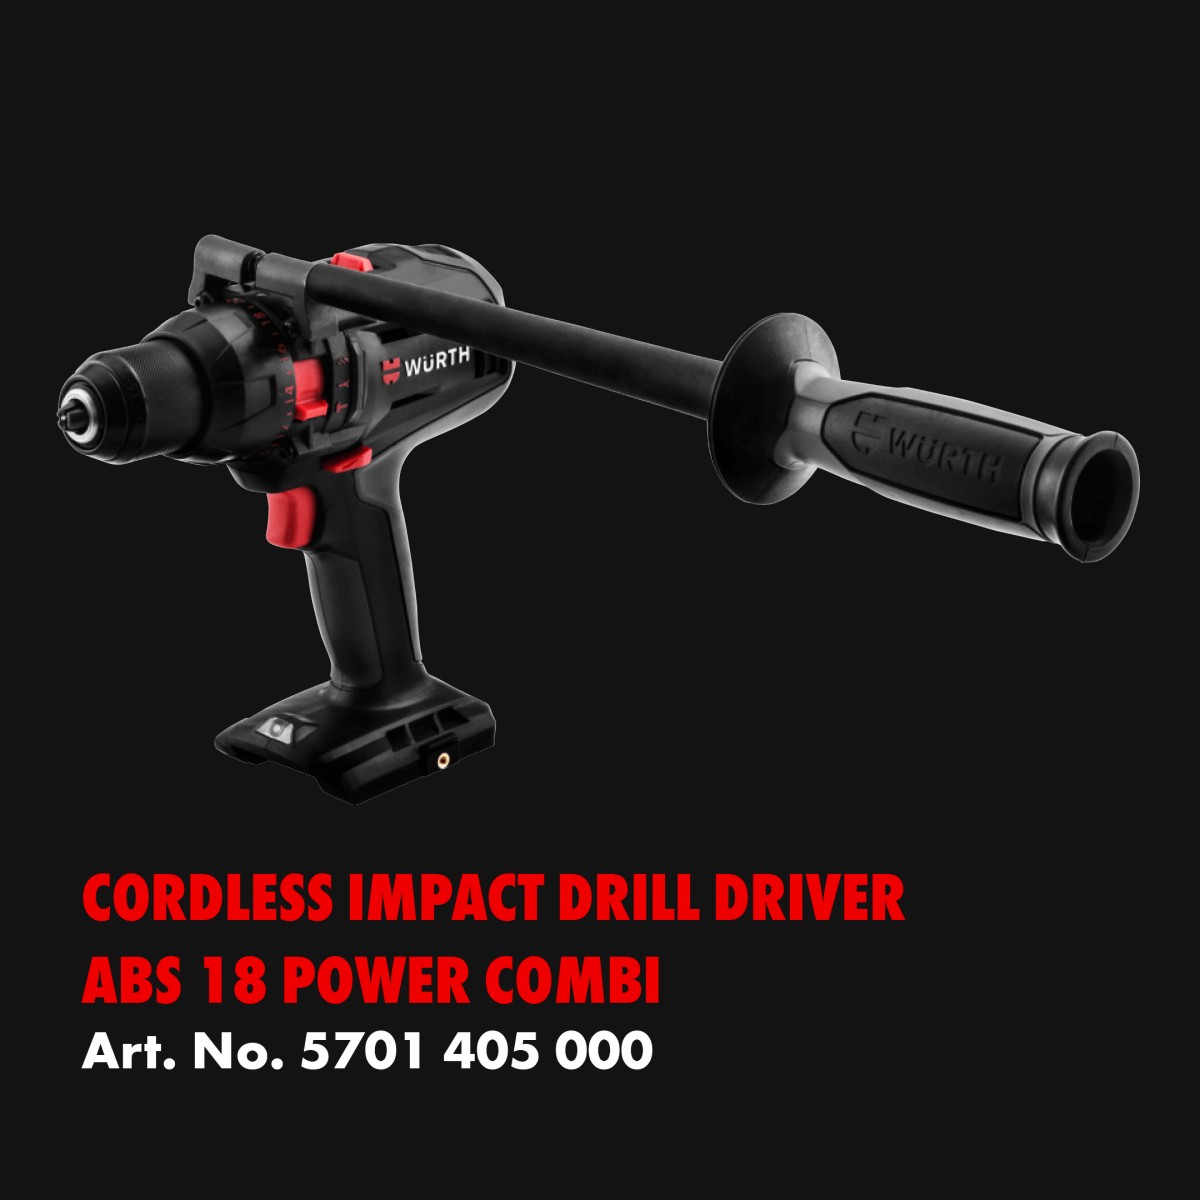 Cordless Drill Driver ABS-18 Power Combi